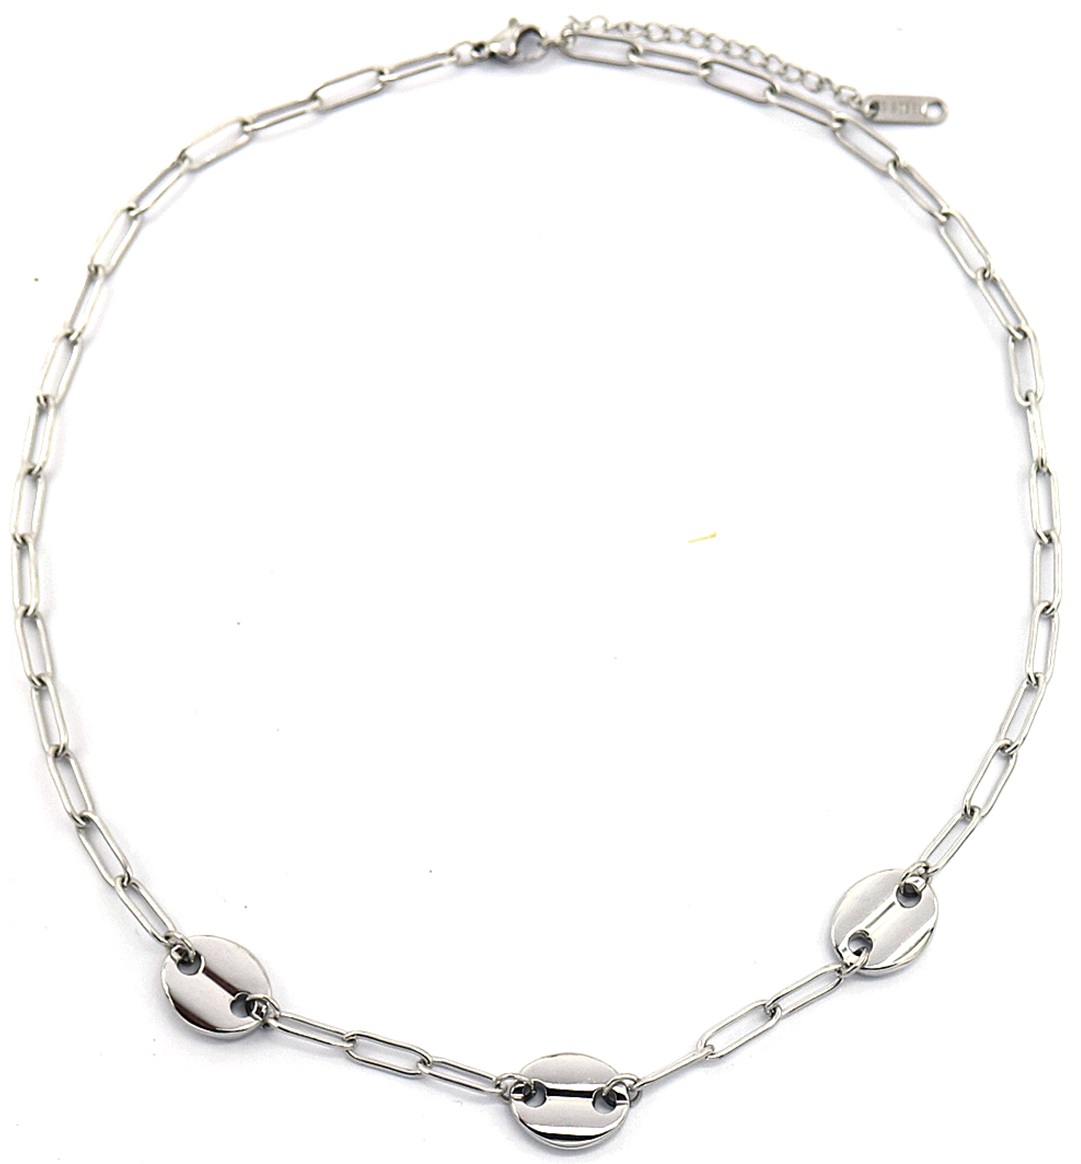 F-C21.3 N2033-022S S. Steel Chain Necklace Silver